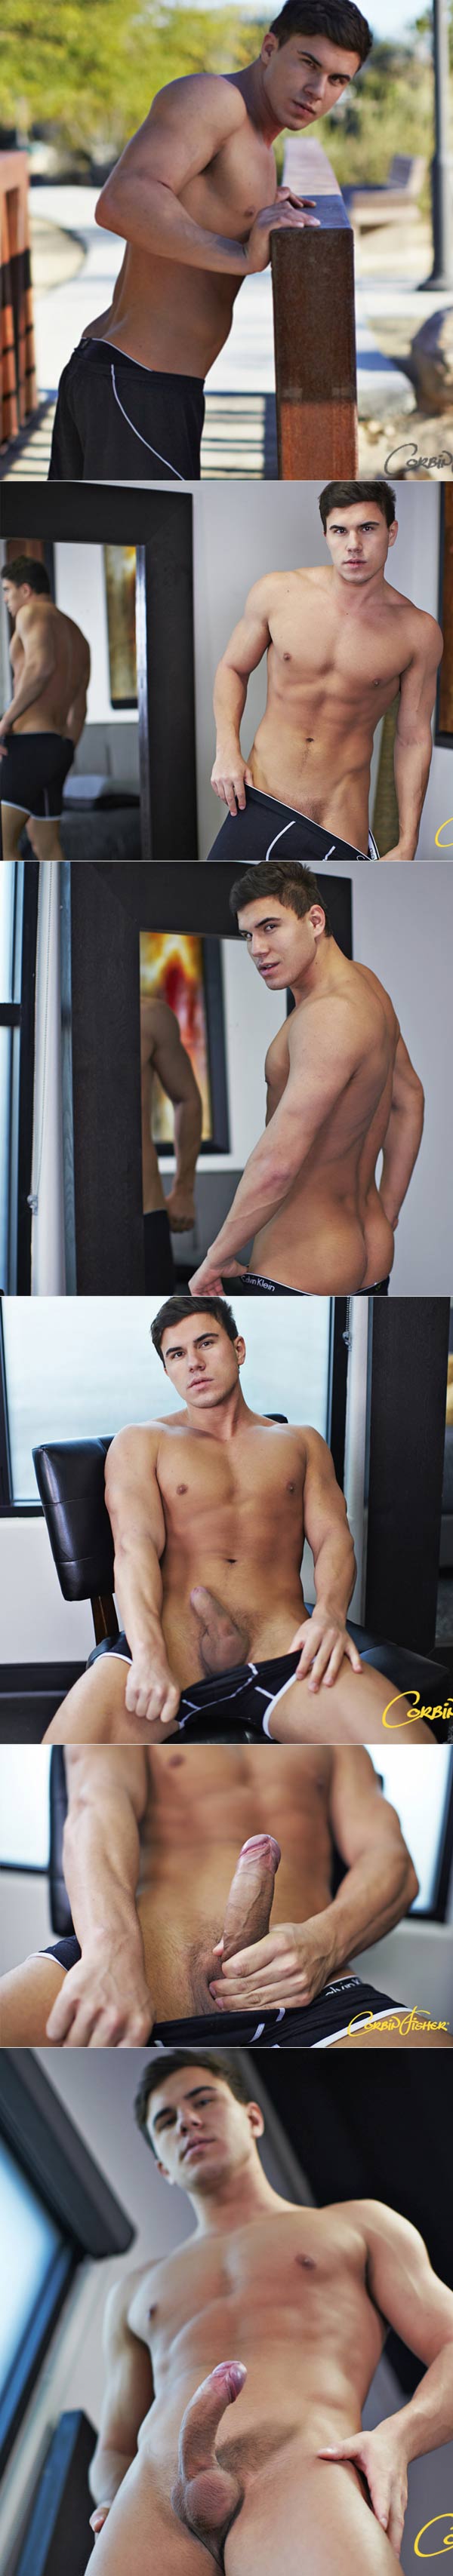 Vincent (Solo) at CorbinFisher